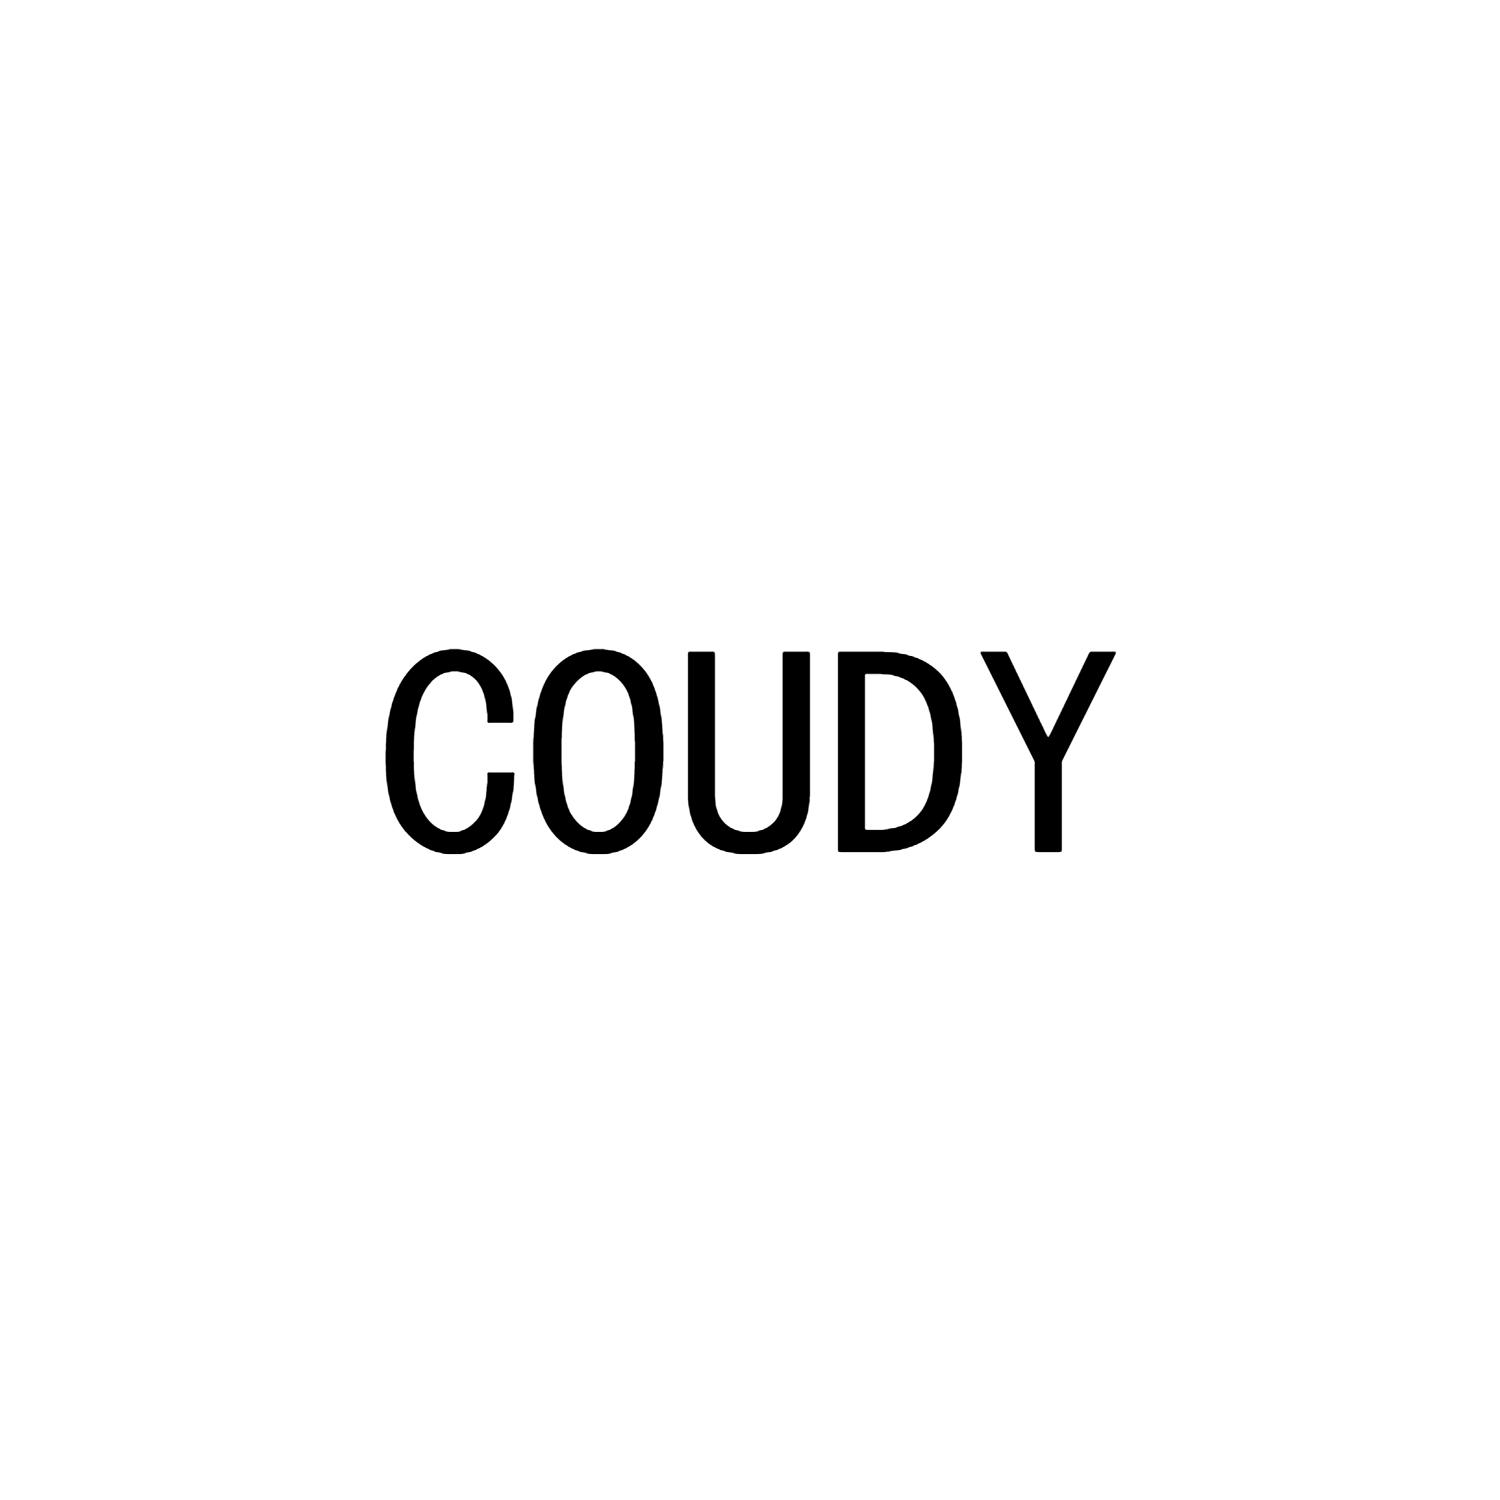 COUDY